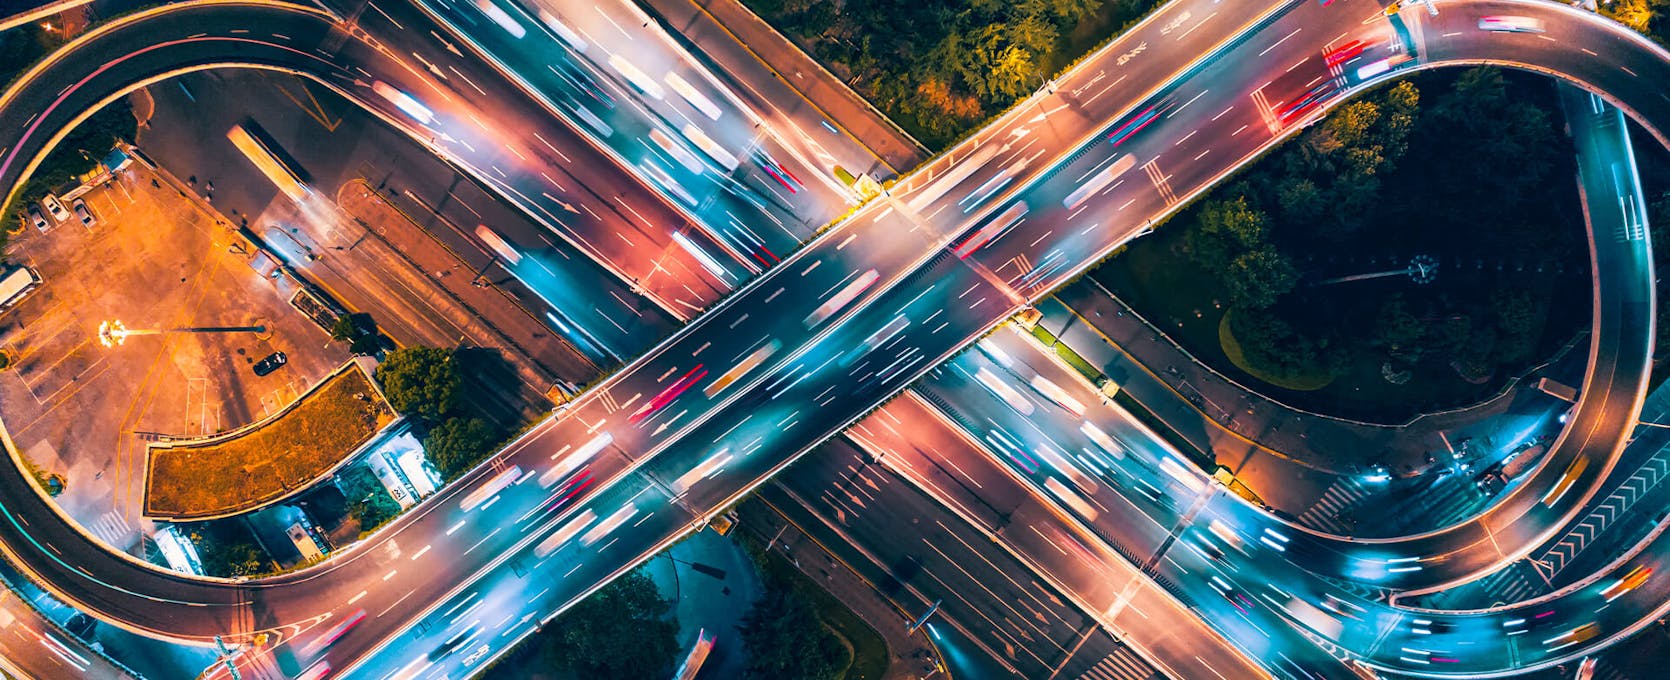 Aerial view of cars driving over highway at night